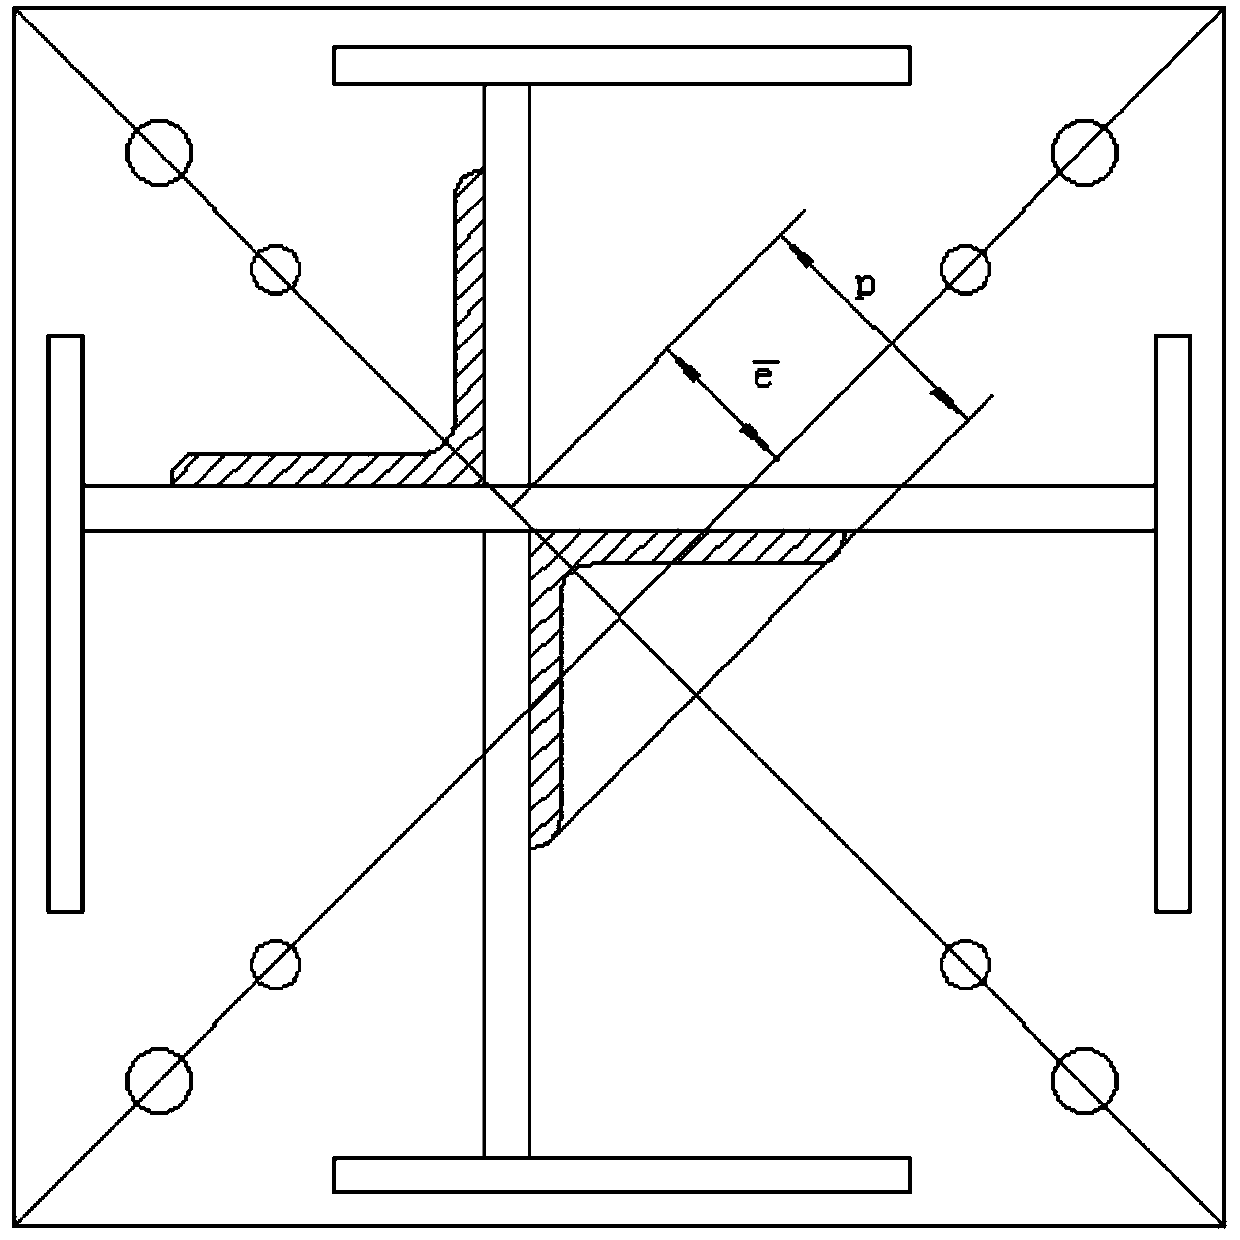 A method for calculating the compressive bearing capacity of a double-angle steel cross-shaped combined section component